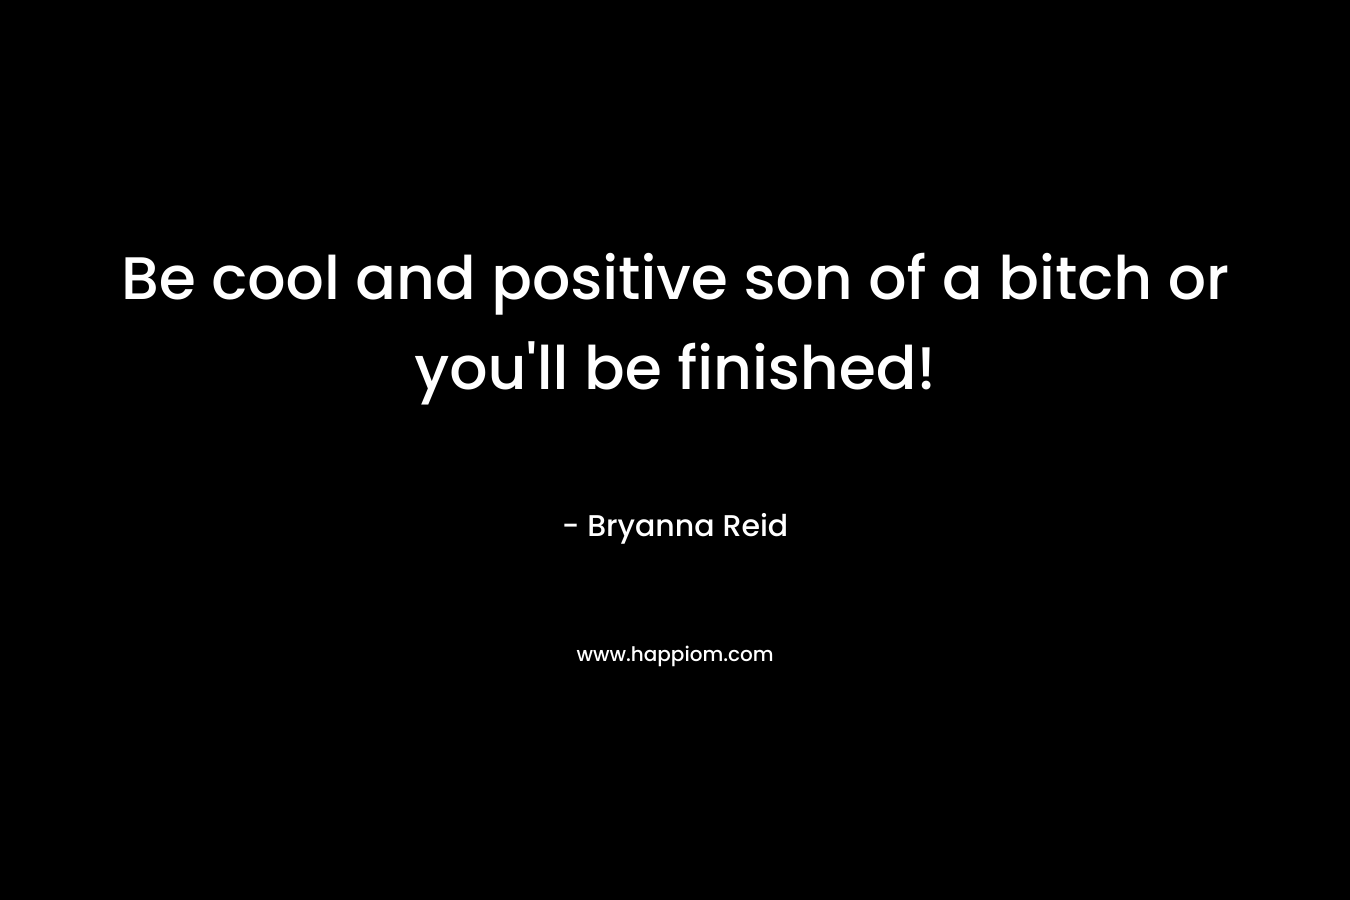 Be cool and positive son of a bitch or you’ll be finished! – Bryanna Reid